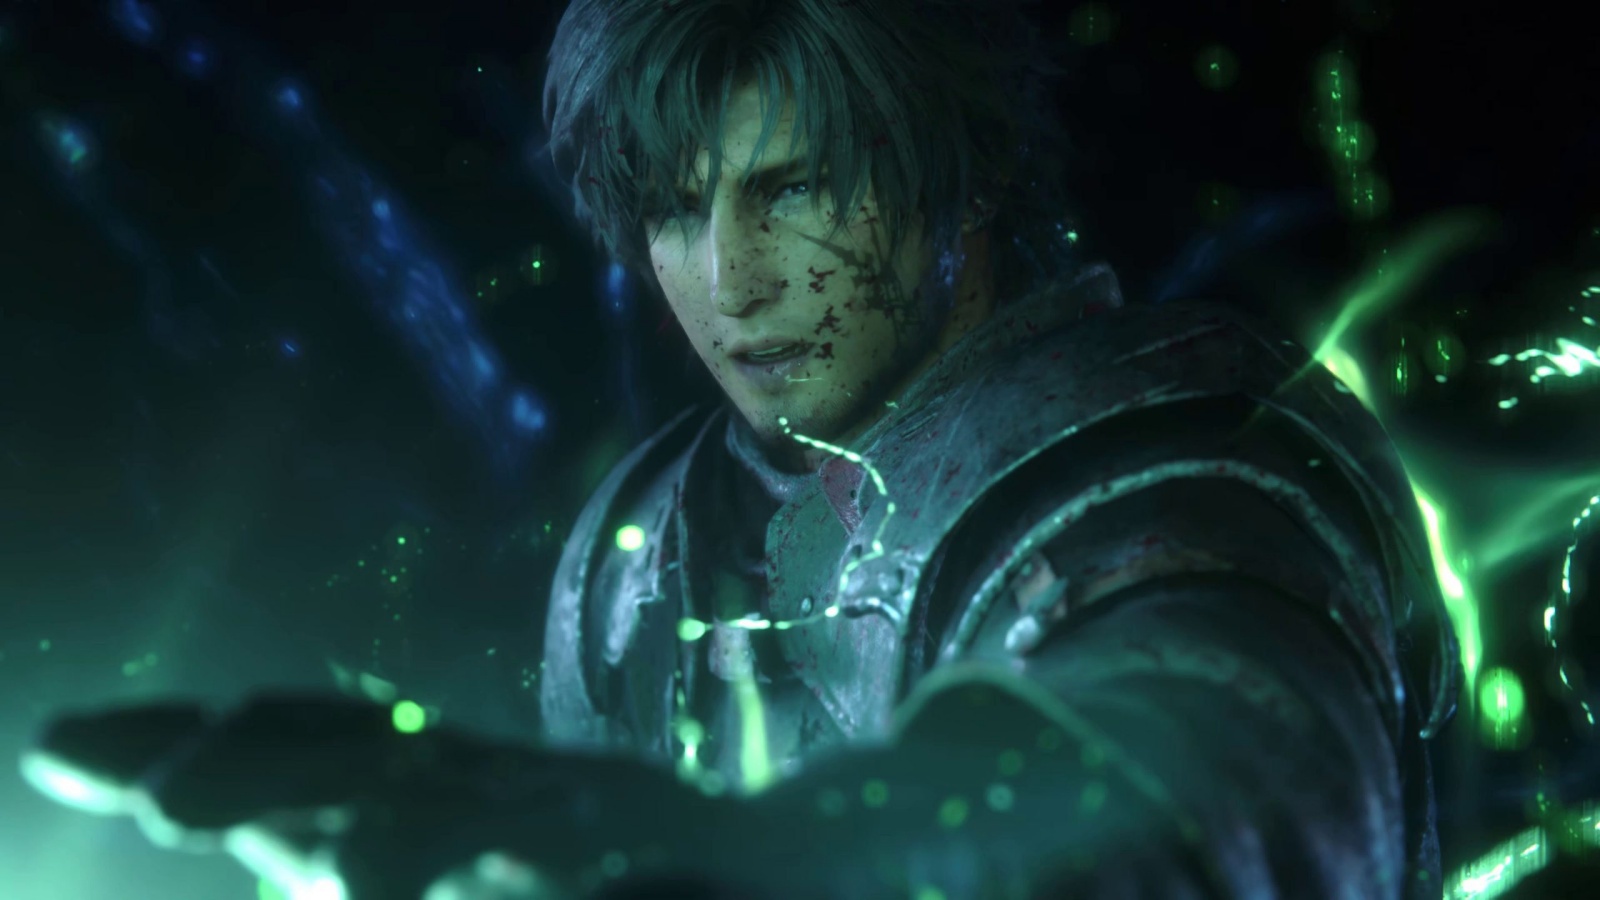 Square Enix vice president Yoshinori Kitase and Final Fantasy XVI producer Naoki Yoshida agree you could see an FF play like a Call of Duty FPS game.